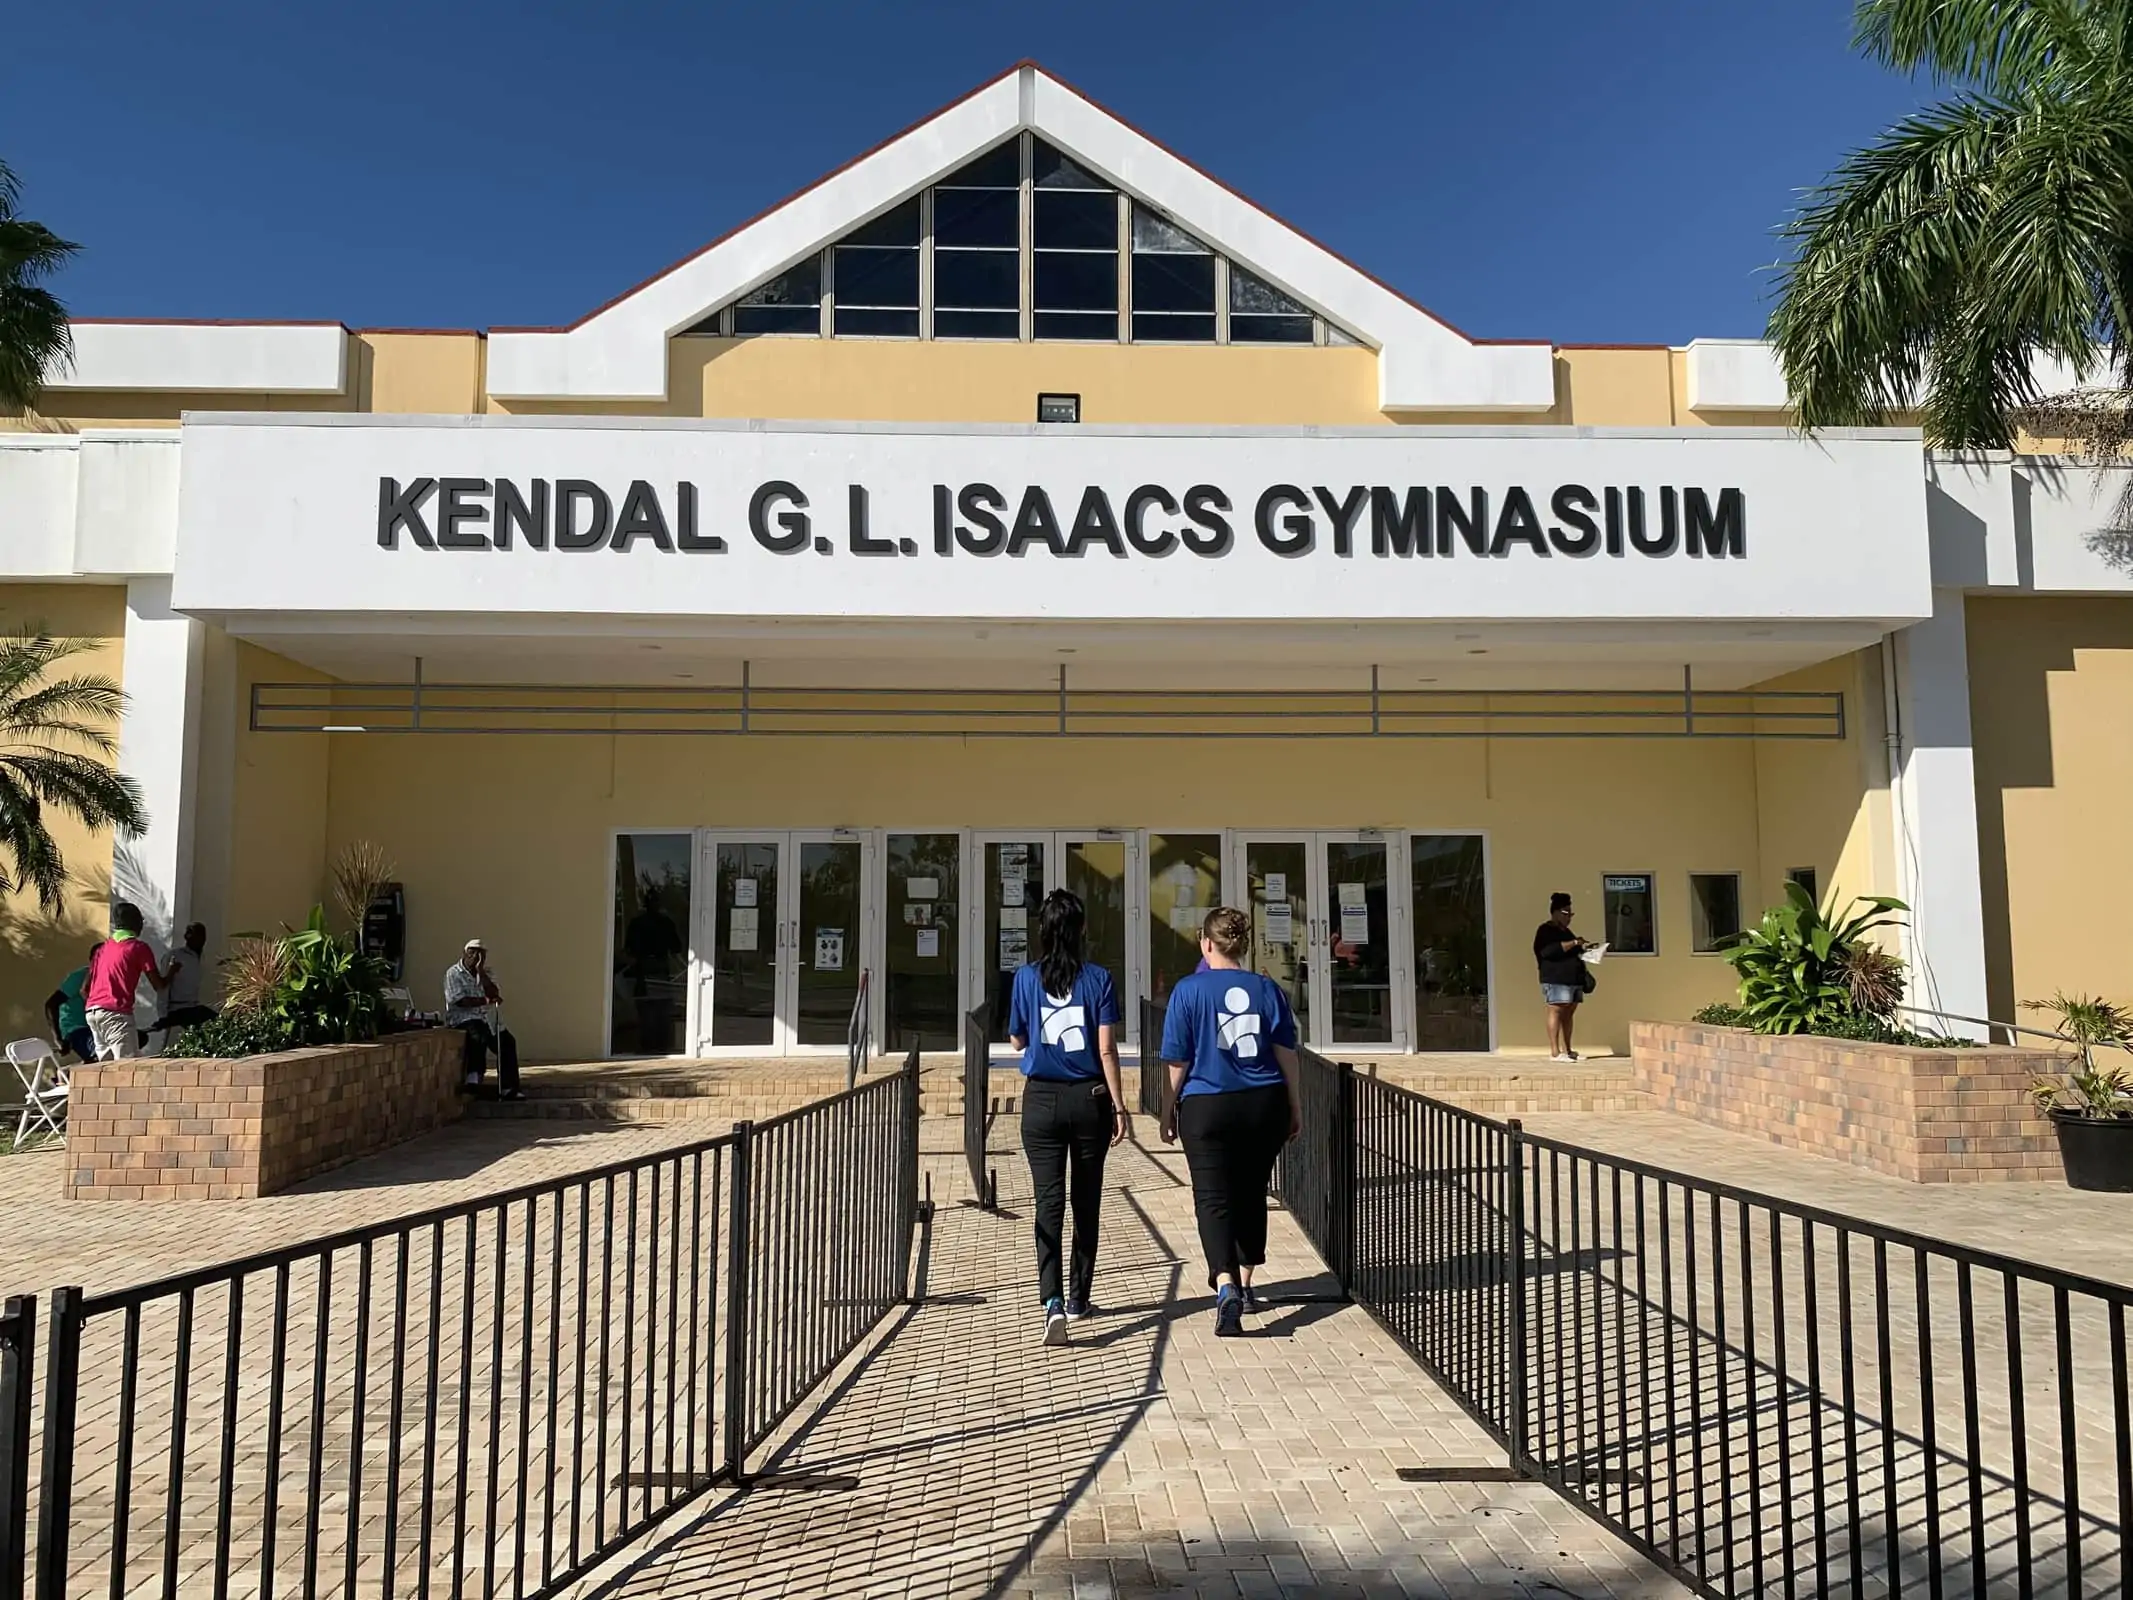 Americares has been providing clinical and MHPSS services daily at the Kendal Isaacs Gymnasium Shelter in Nassau, The Bahamas since it opened. 